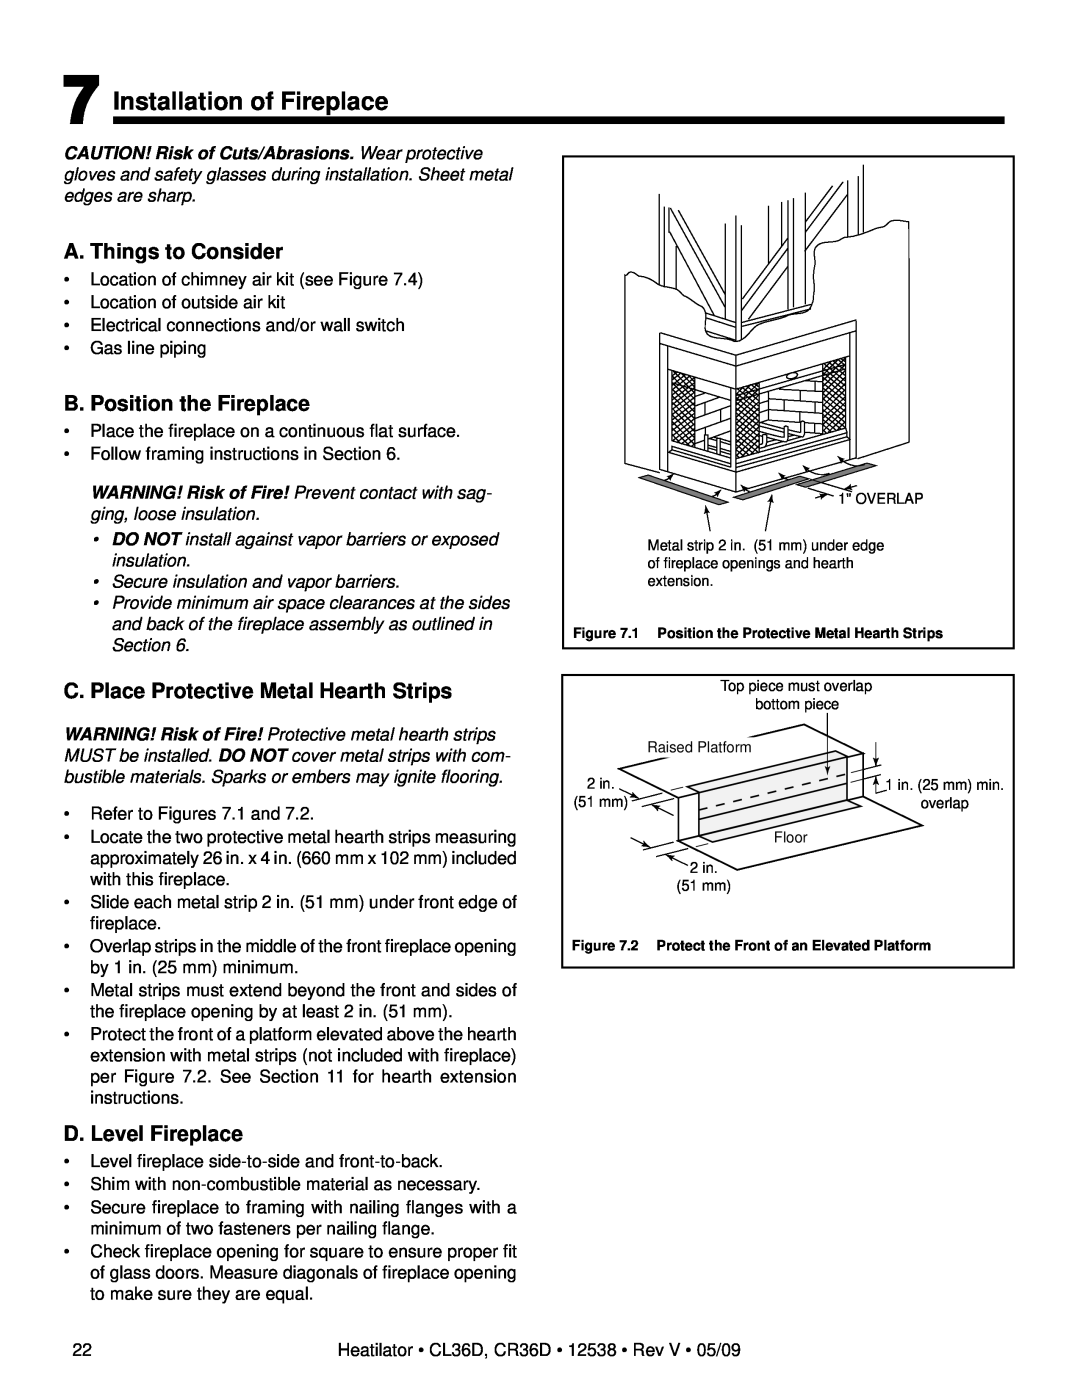 Heatiator CR36D, CL36D Installation of Fireplace, A. Things to Consider, B. Position the Fireplace, D. Level Fireplace 